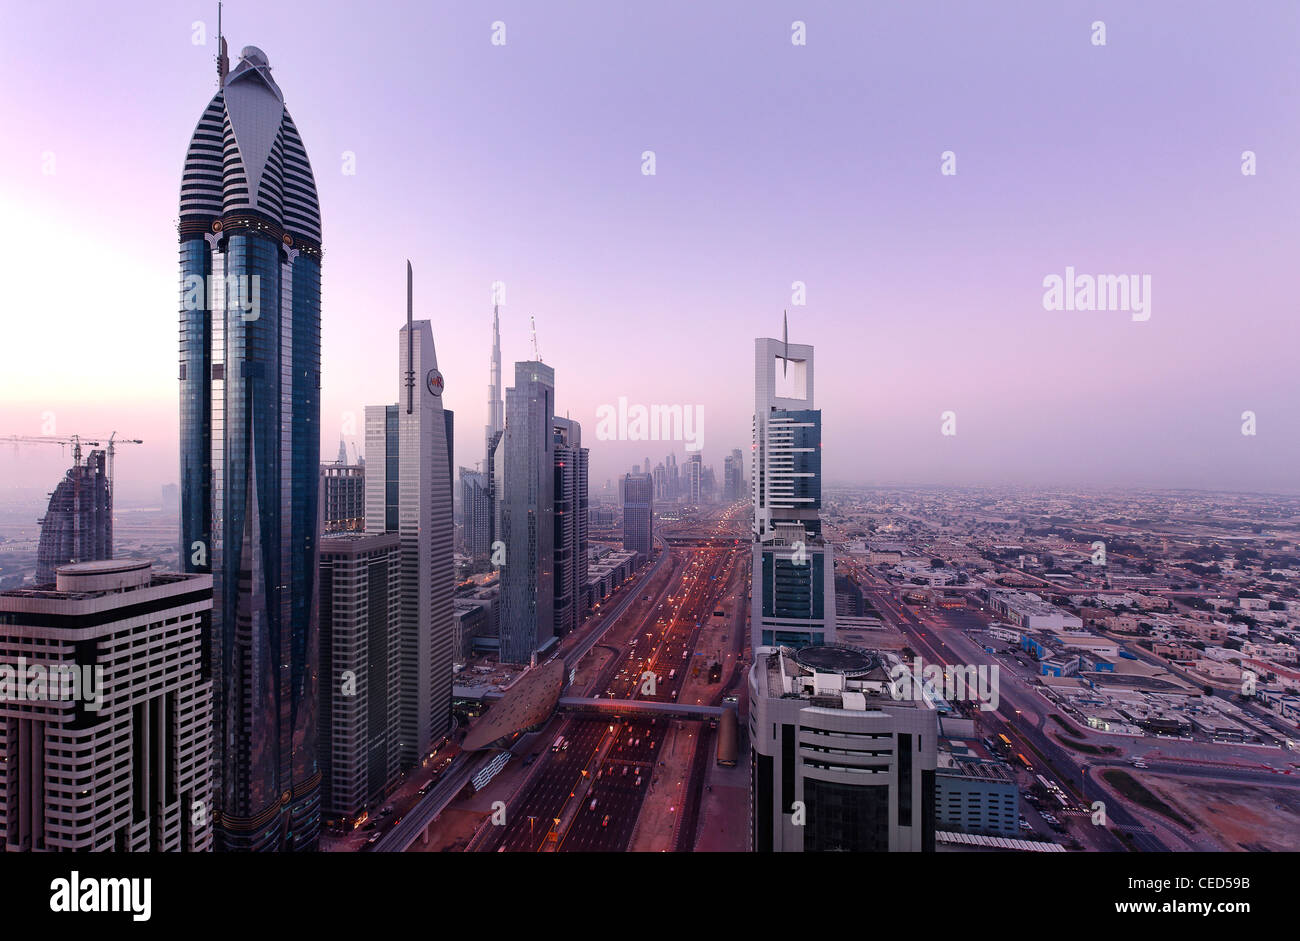 View of downtown Dubai, to the left ROSE RAYHAAN by Rotana, towers, skyscrapers, hotels, modern architecture, Sheikh Zayed Road Stock Photo